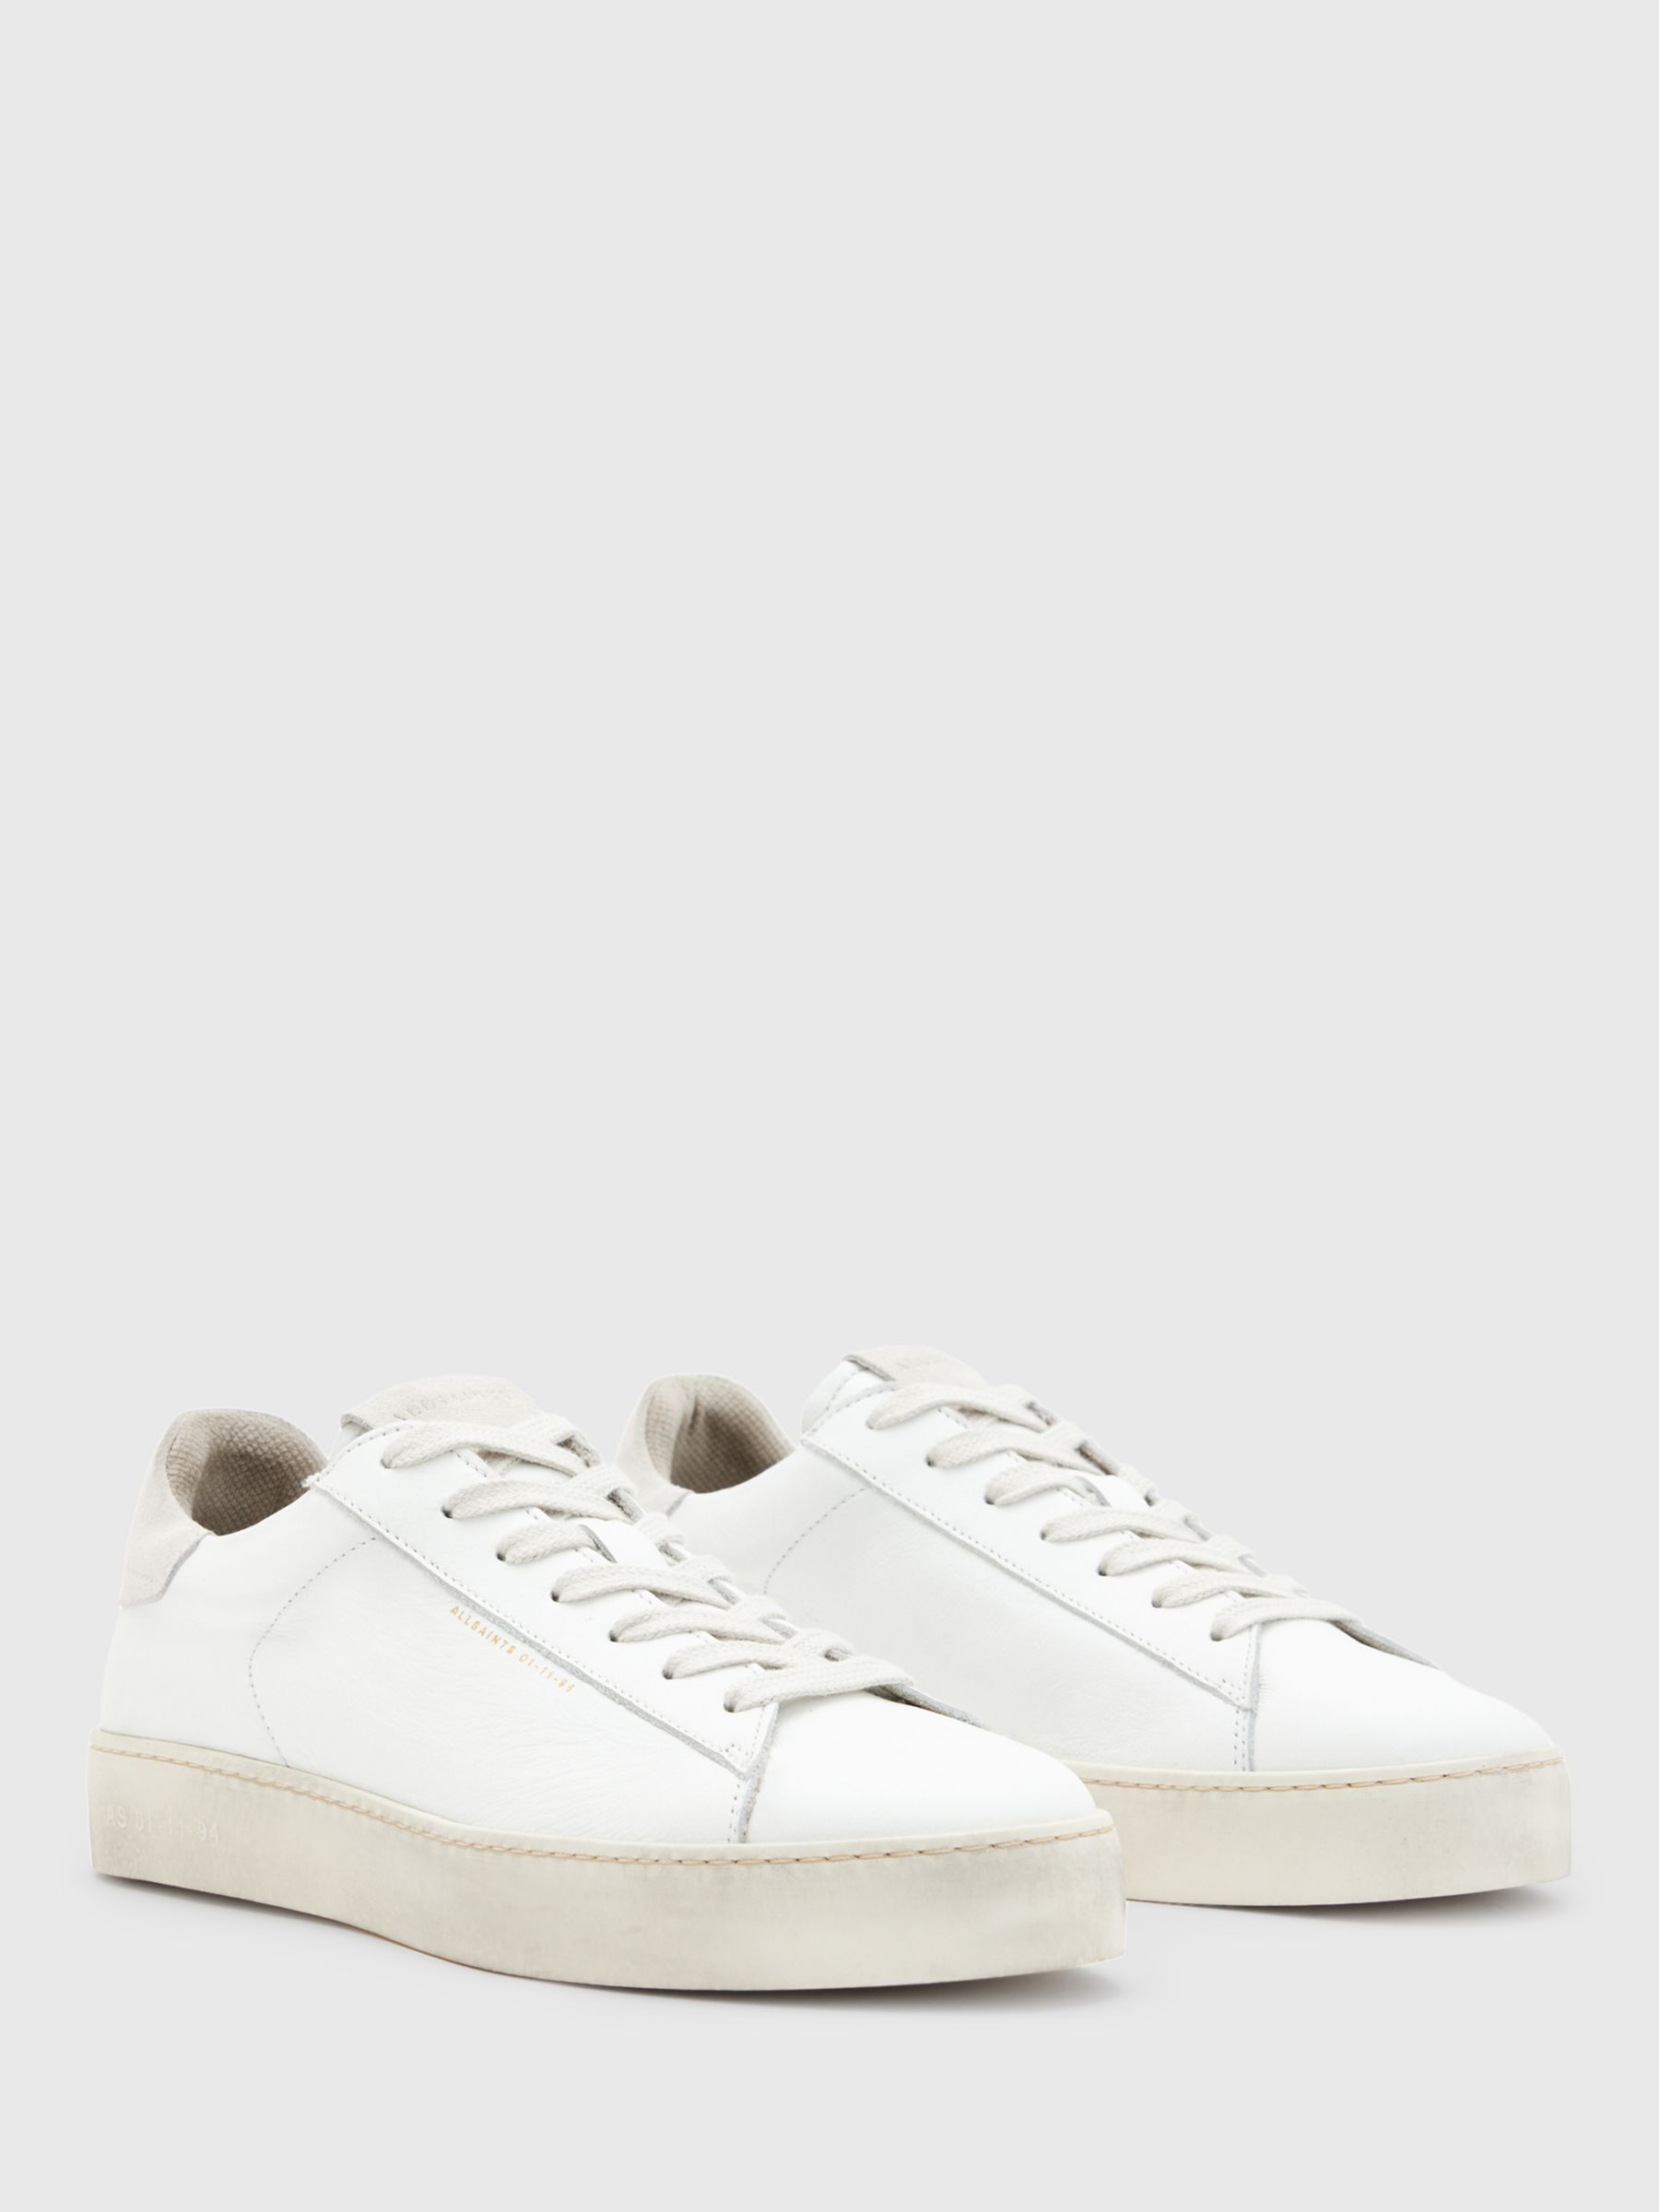 AllSaints Shana Leather Lace Up Trainers, White at John Lewis & Partners